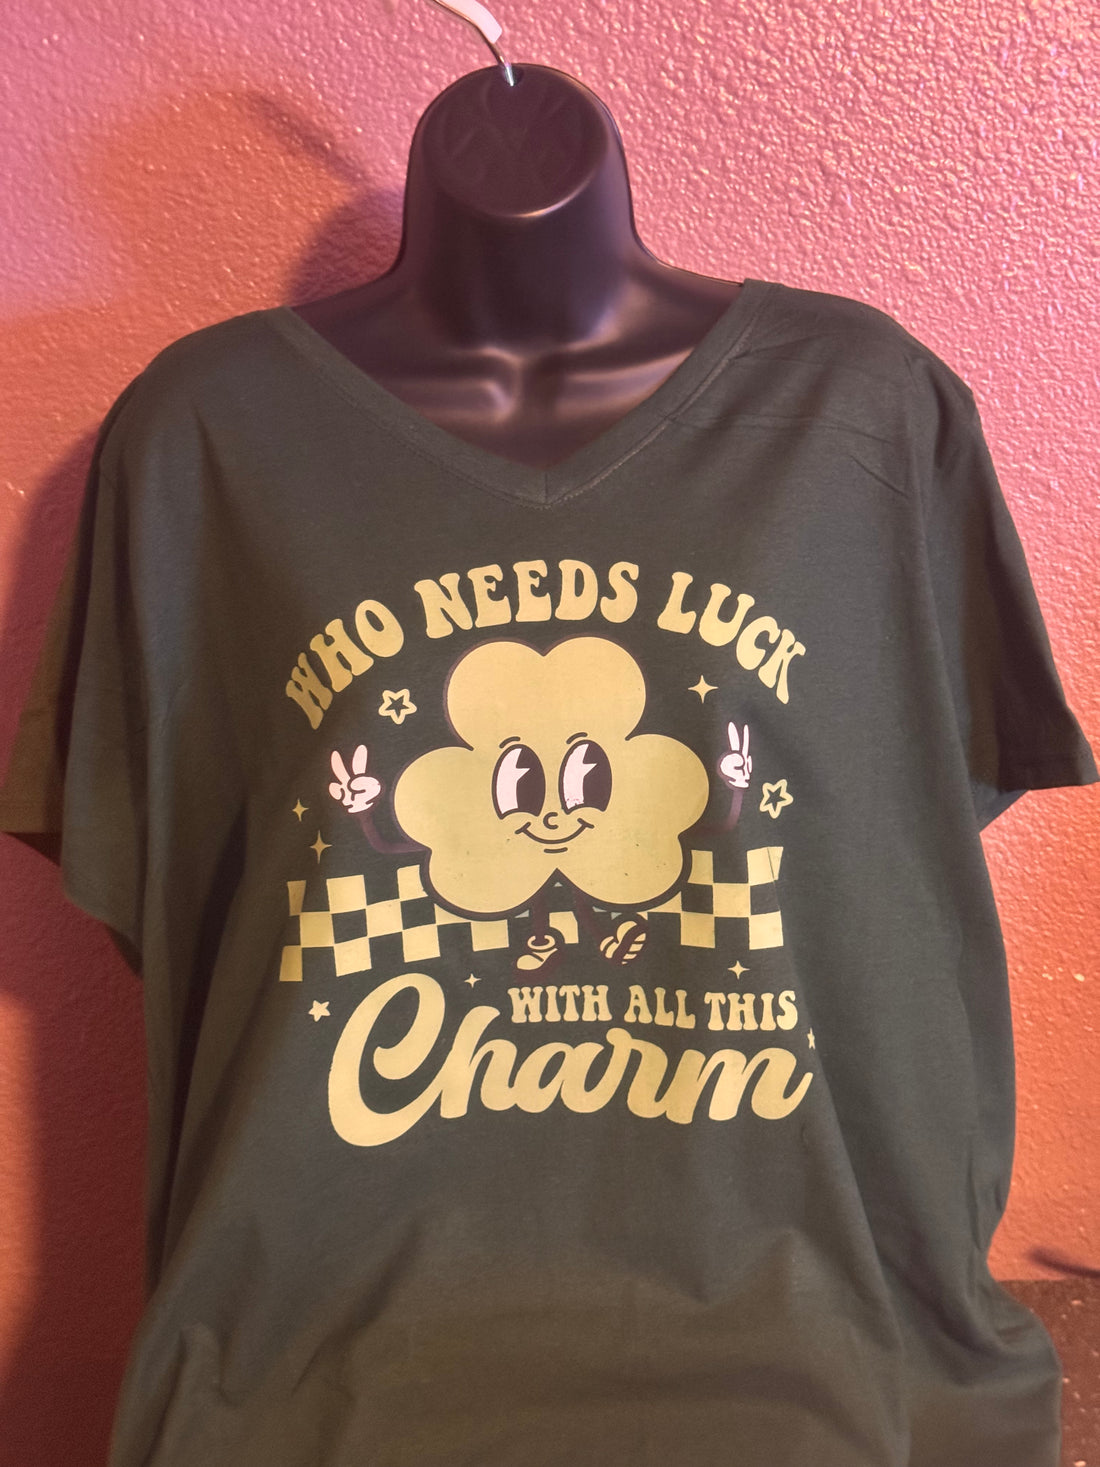 T-Shirt with 4 Leaf Clover “Who Needs Luck with all this Charm” Design